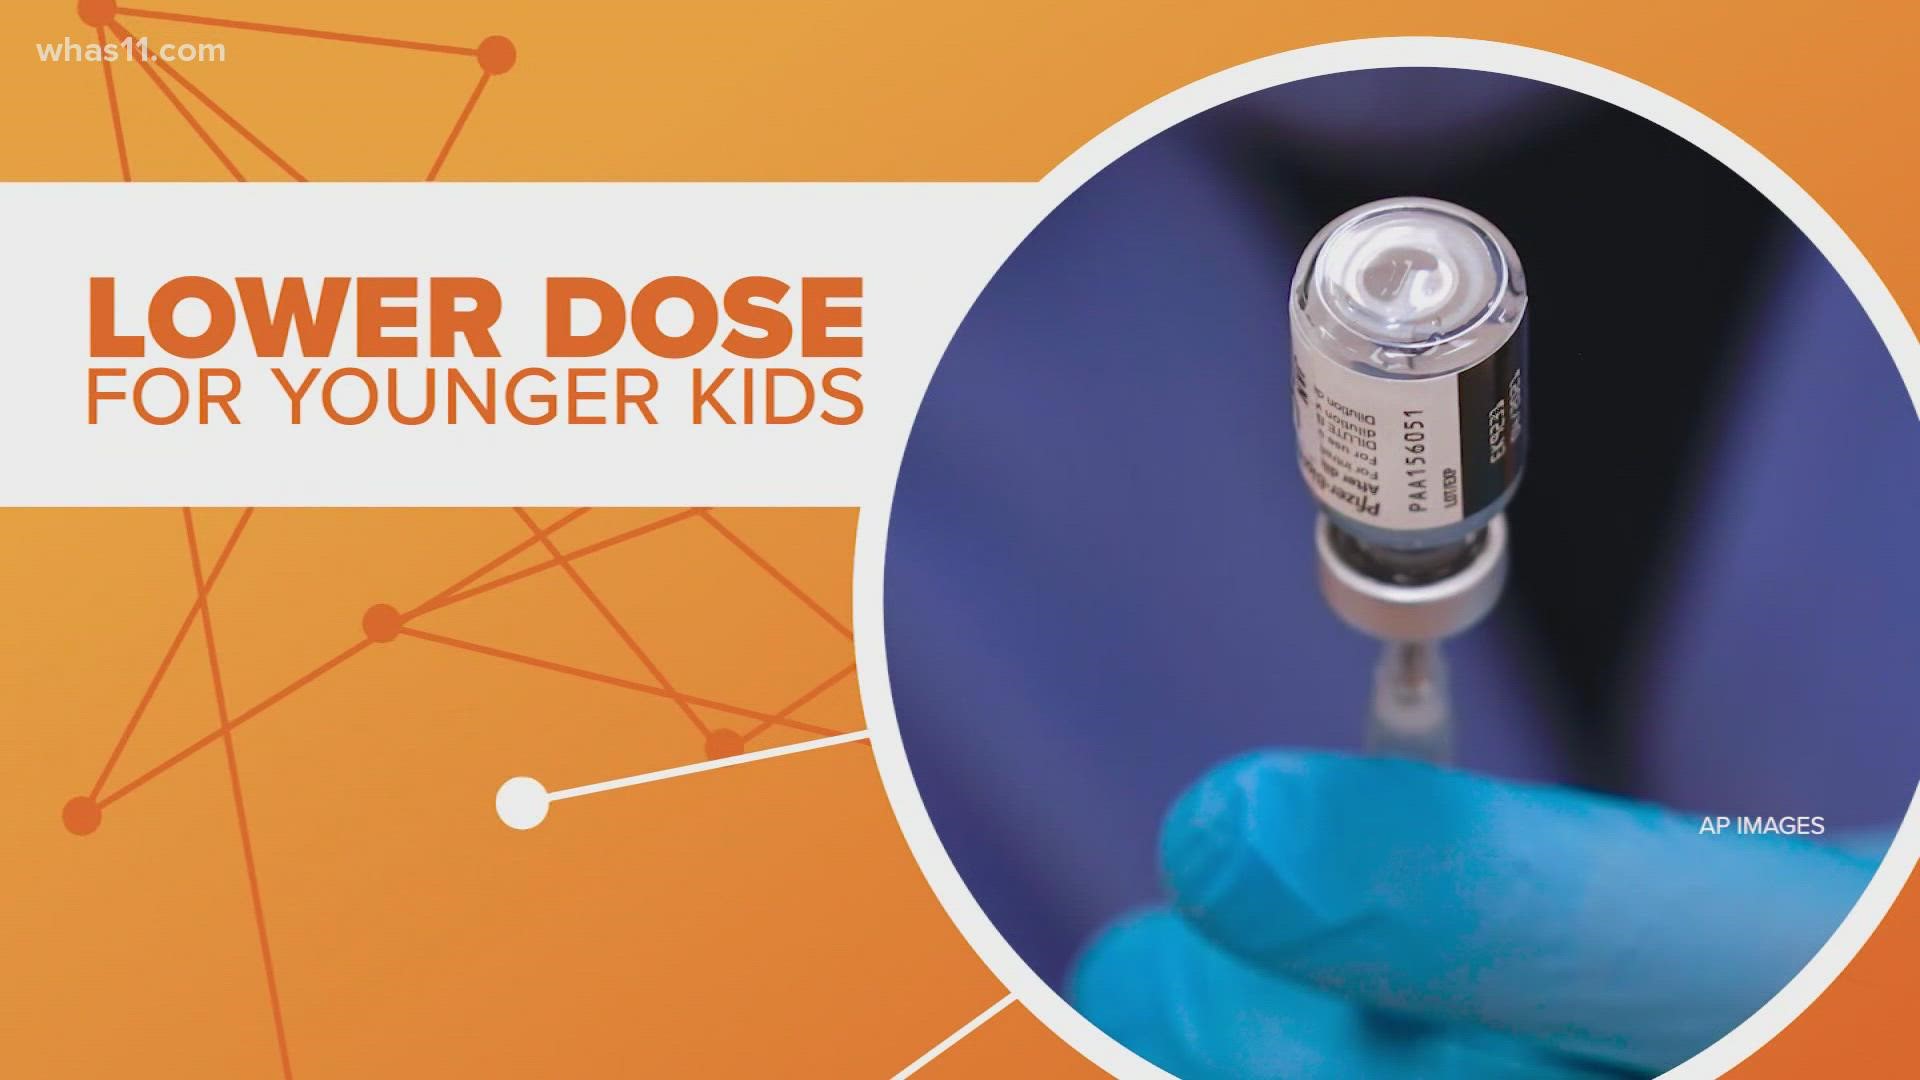 The Pfizer vaccine is available for kids 12 and up, but getting the 5- to 11-year-olds vaccinated will be key in minimizing COVID spread through schools.